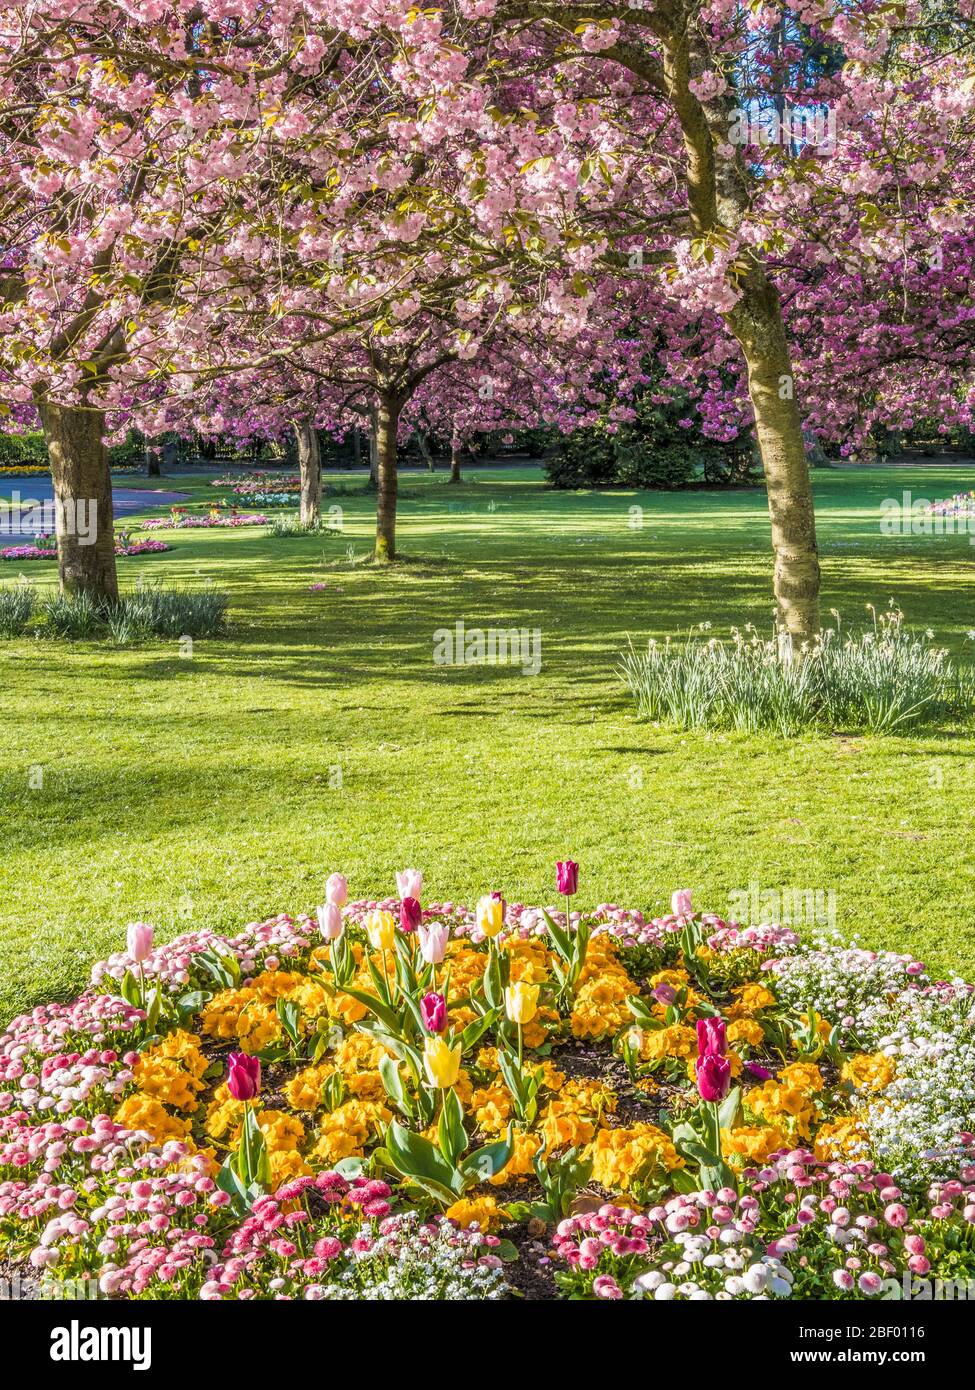 A bed of tulips, yellow primulas and pink Bellis daisies with flowering pink cherry trees in the background in an urban public park in England. Stock Photo